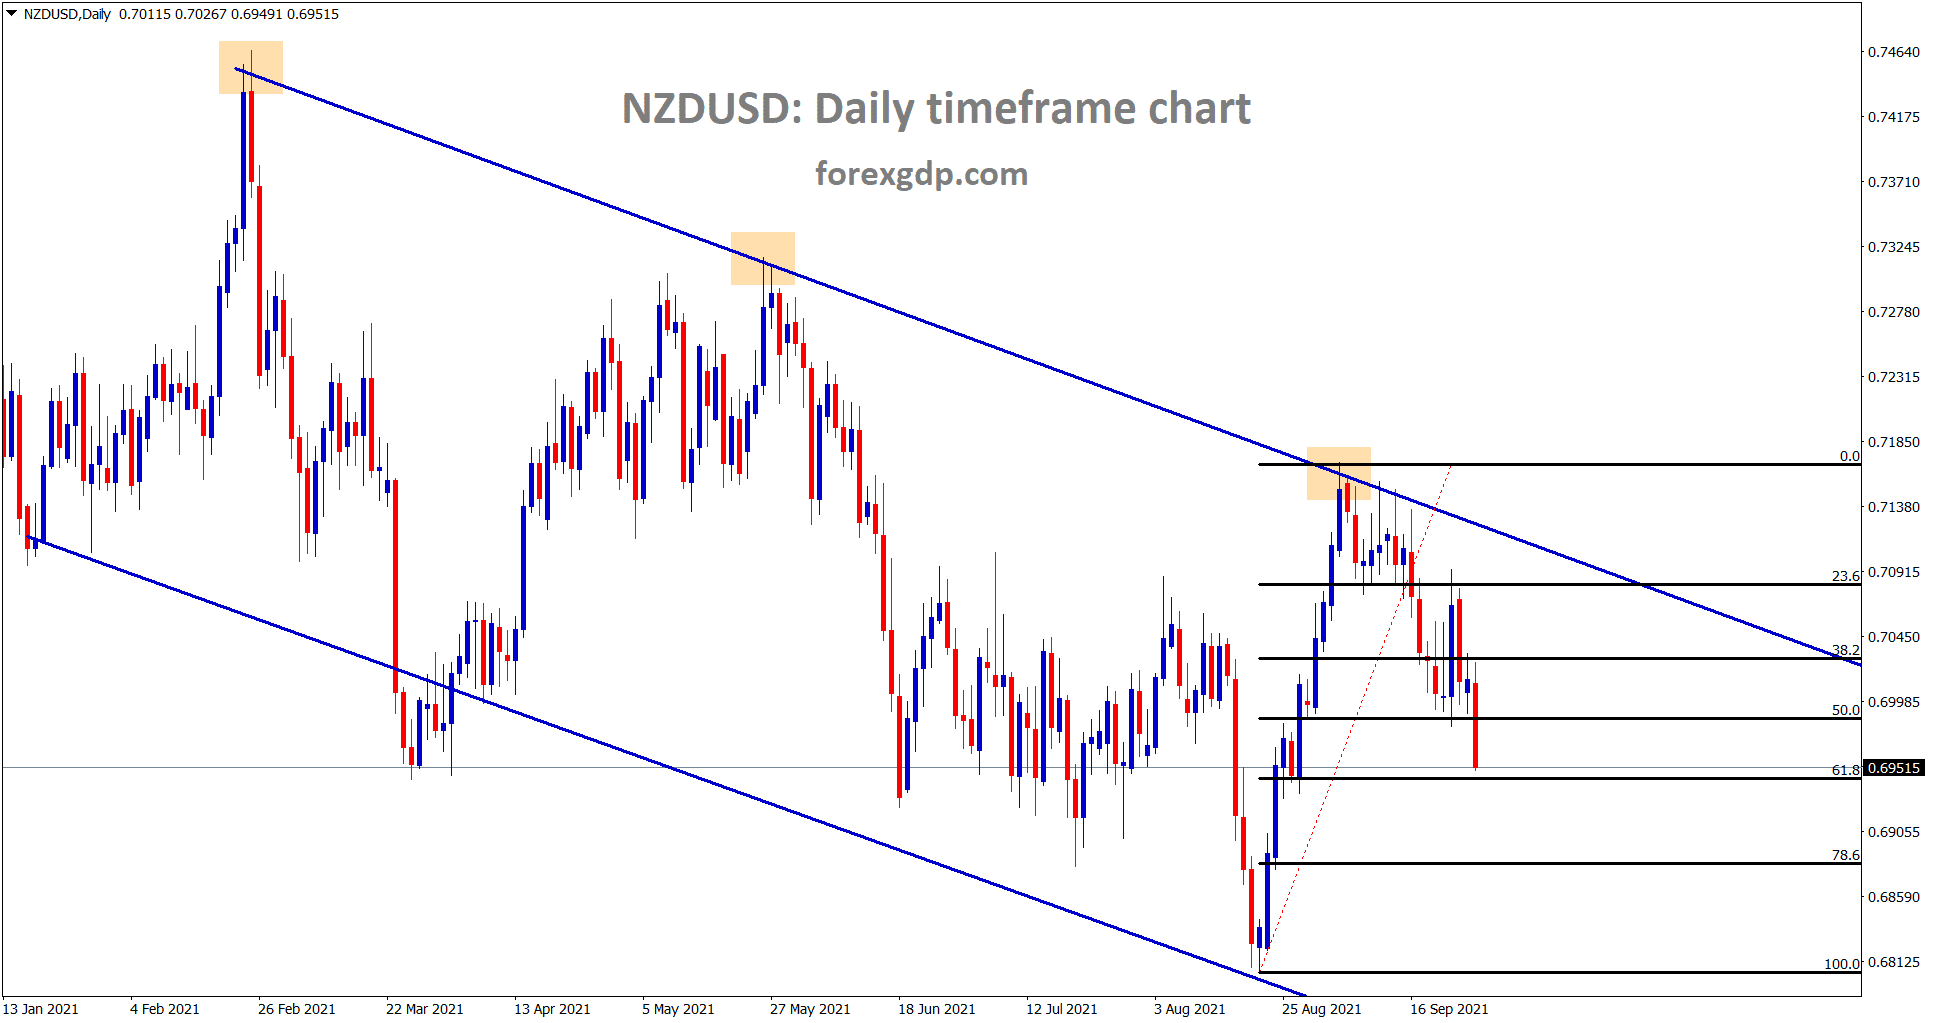 NZDUSD is moving in a descending channel falling towards the 61 retracement area